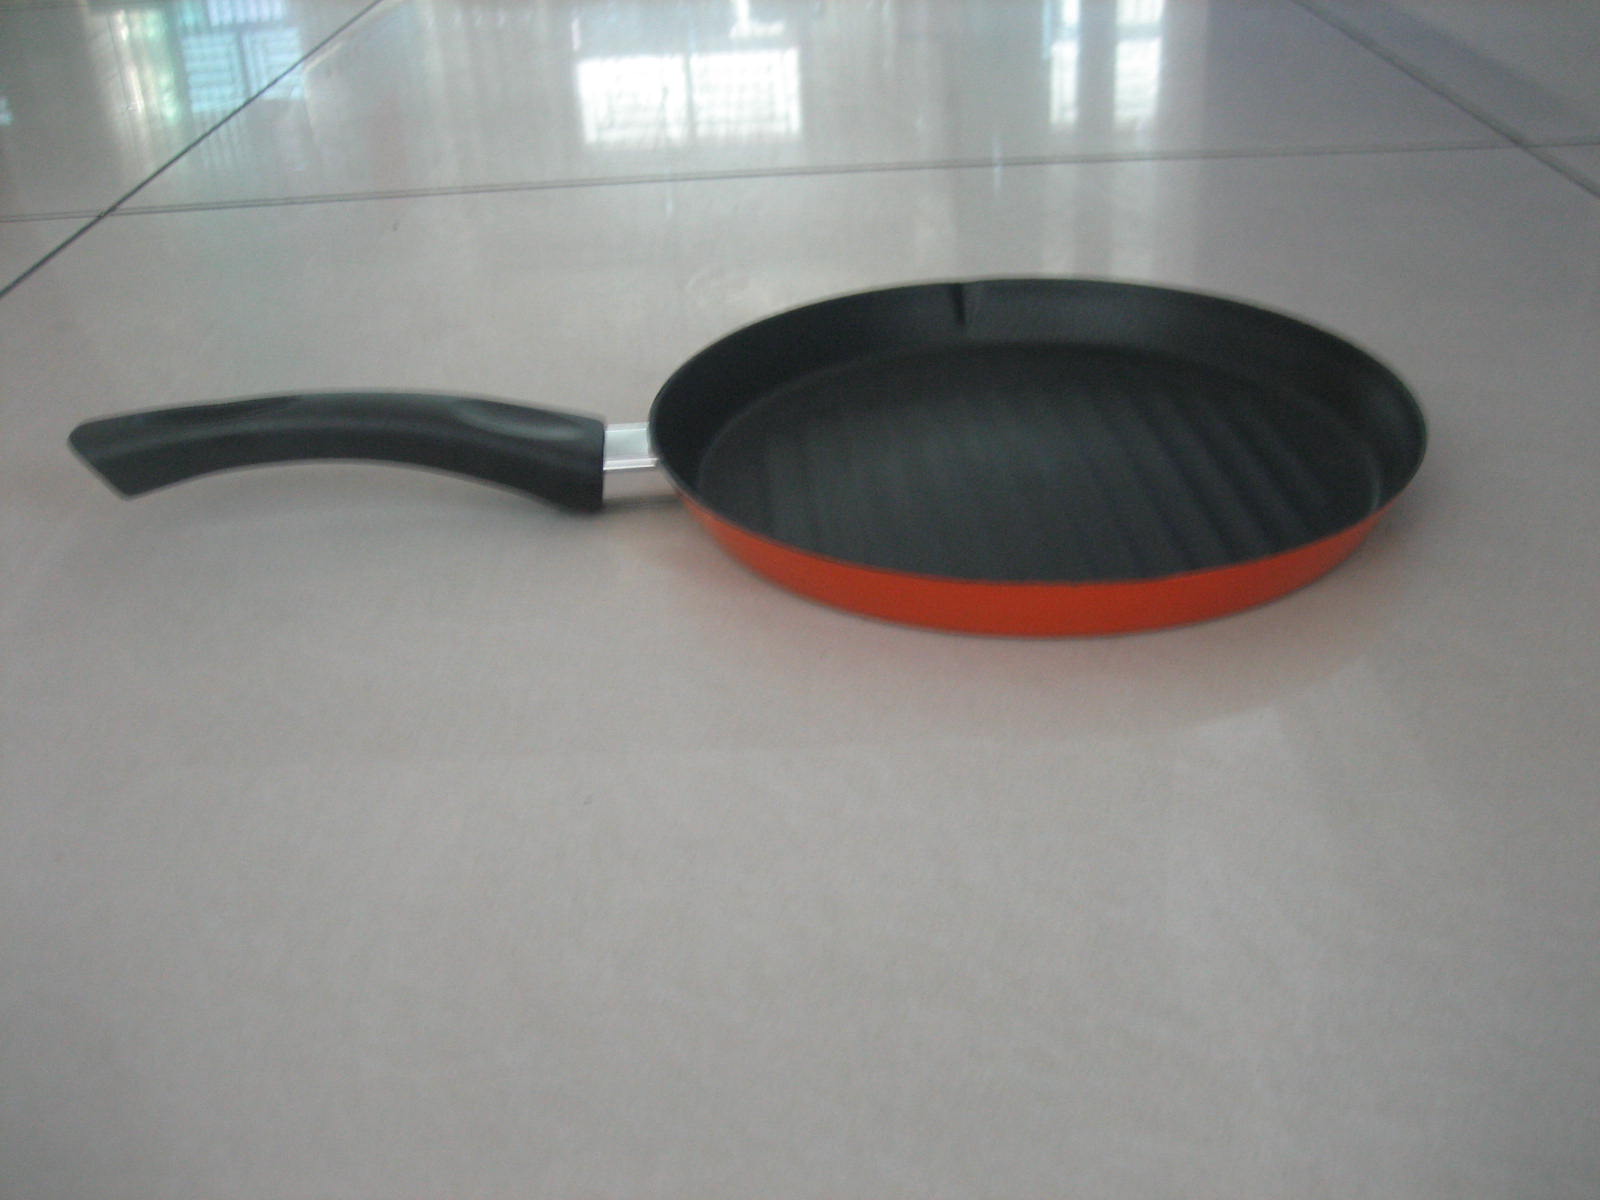 enamel grill pan with non-stick coating inside